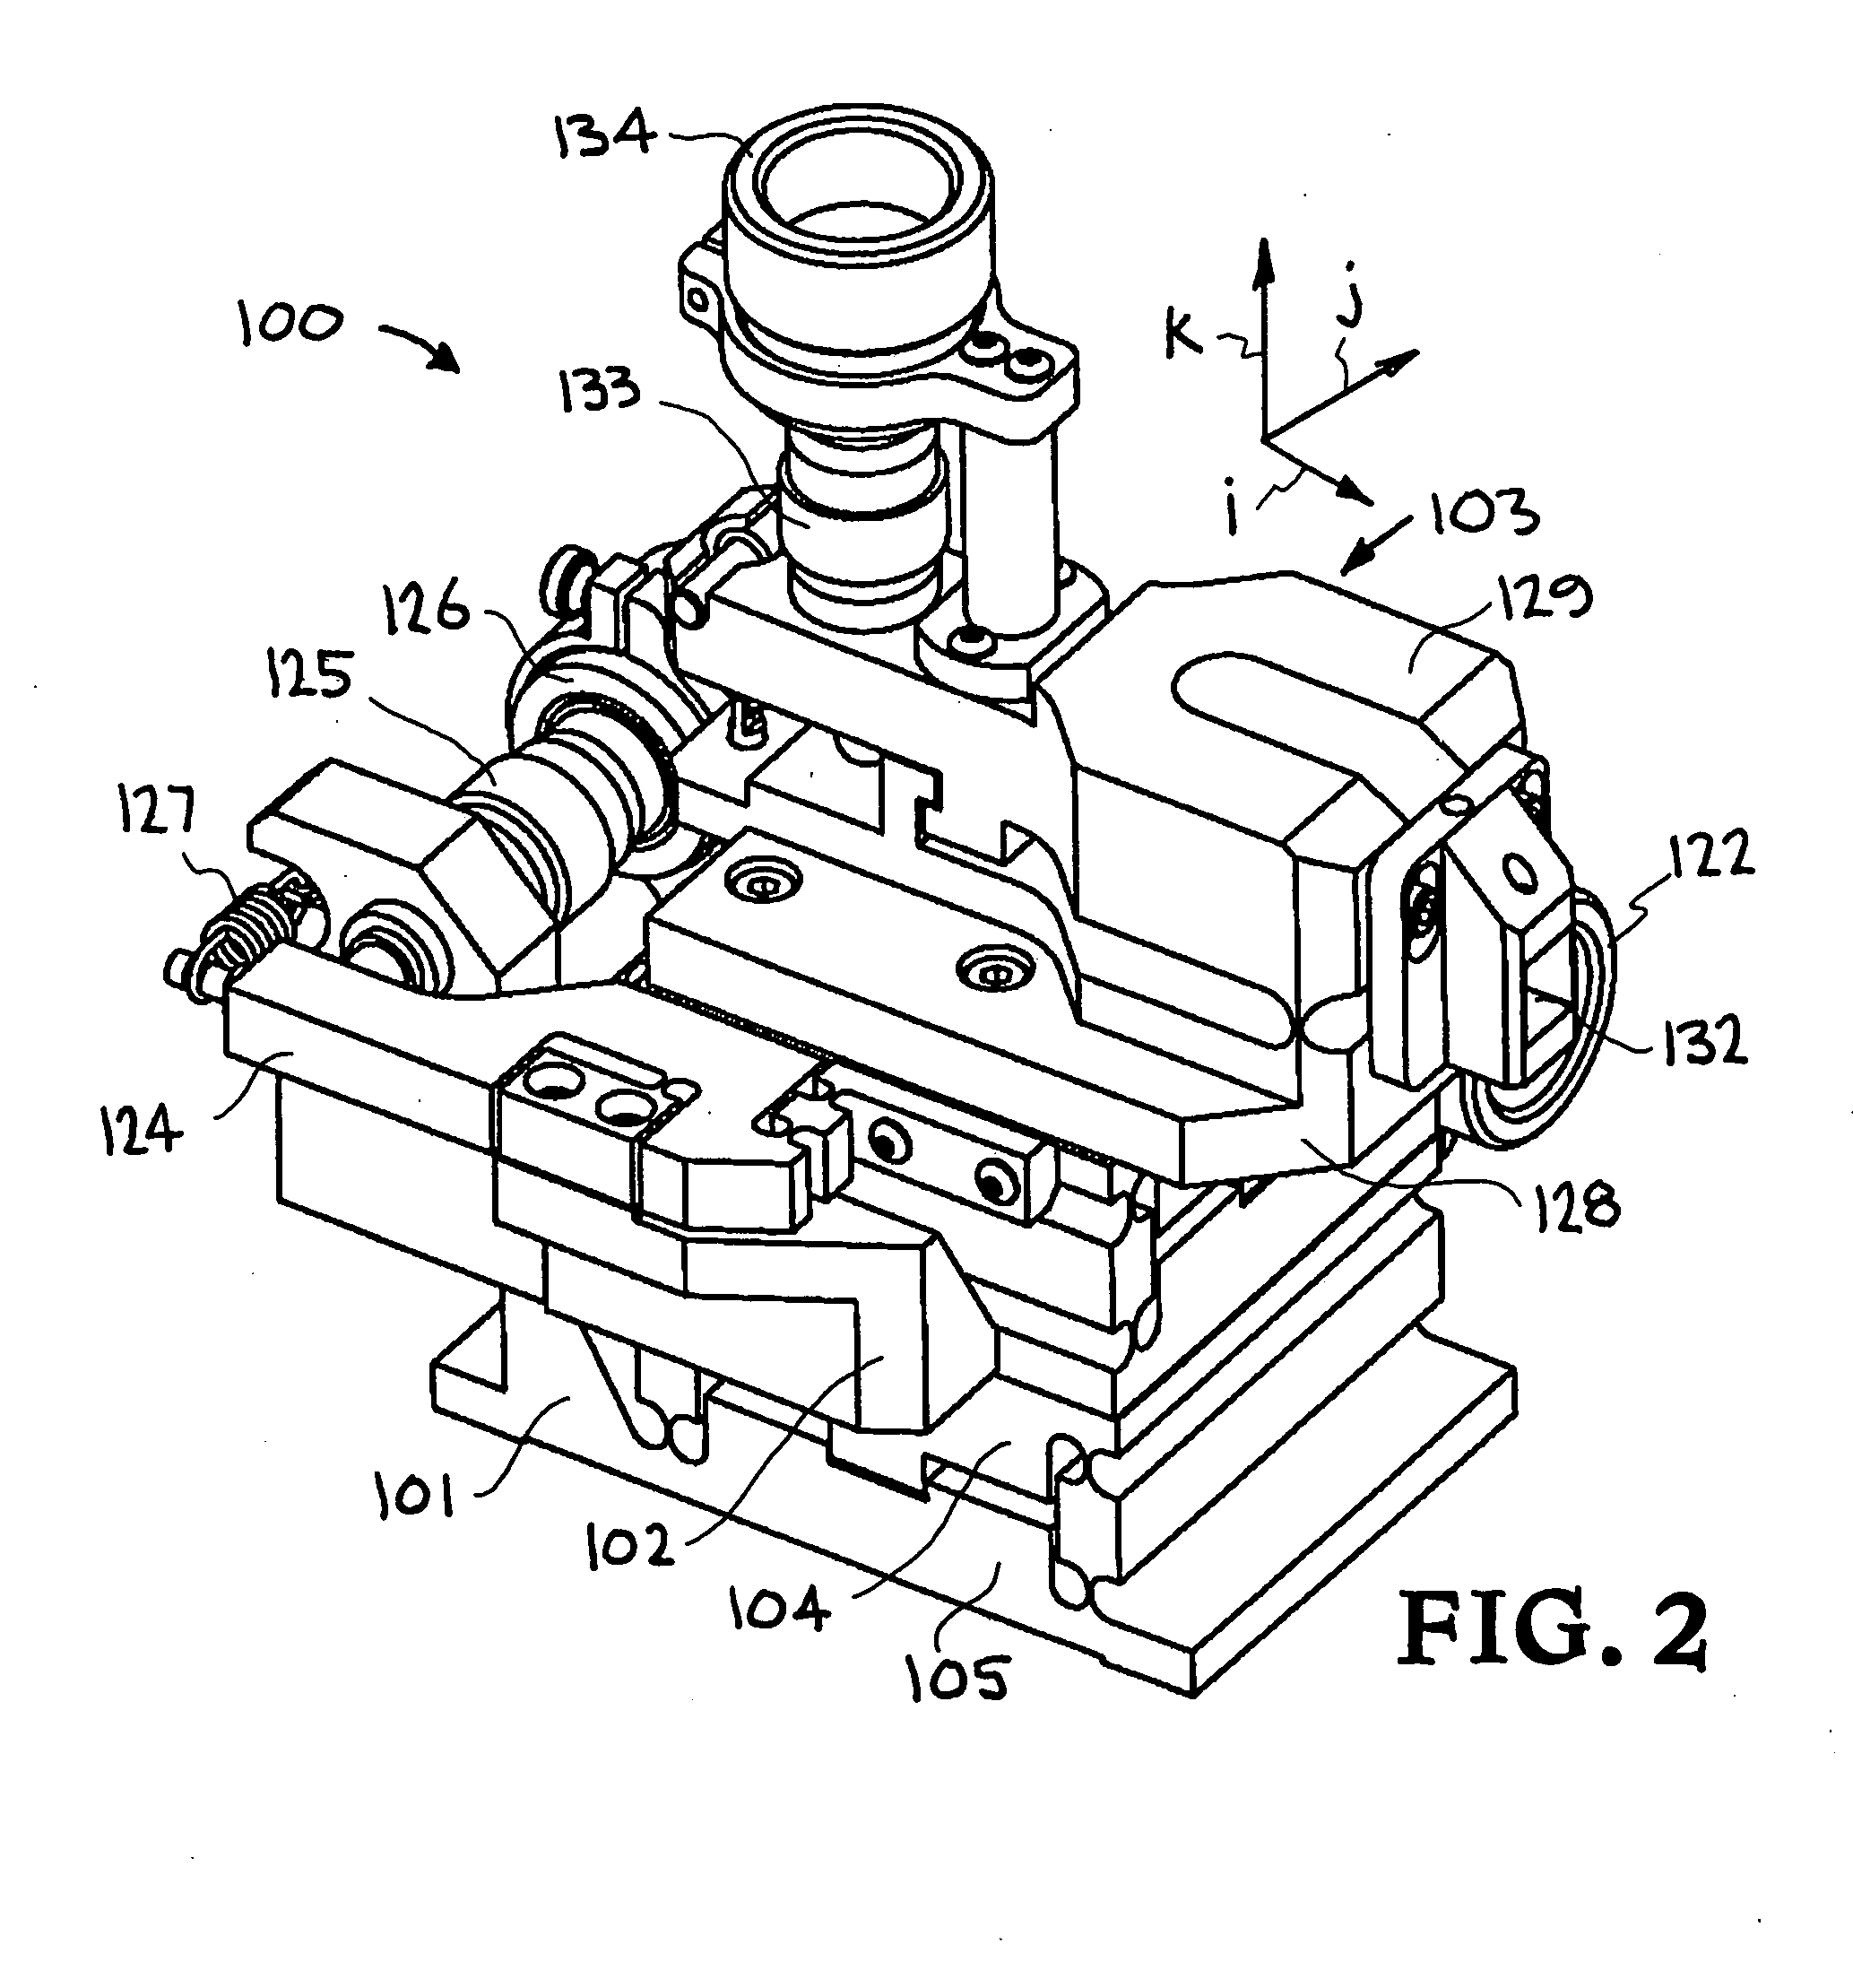 Precision tool holder with flexure-adjusted, three degrees of freedom for a four-axis lathe